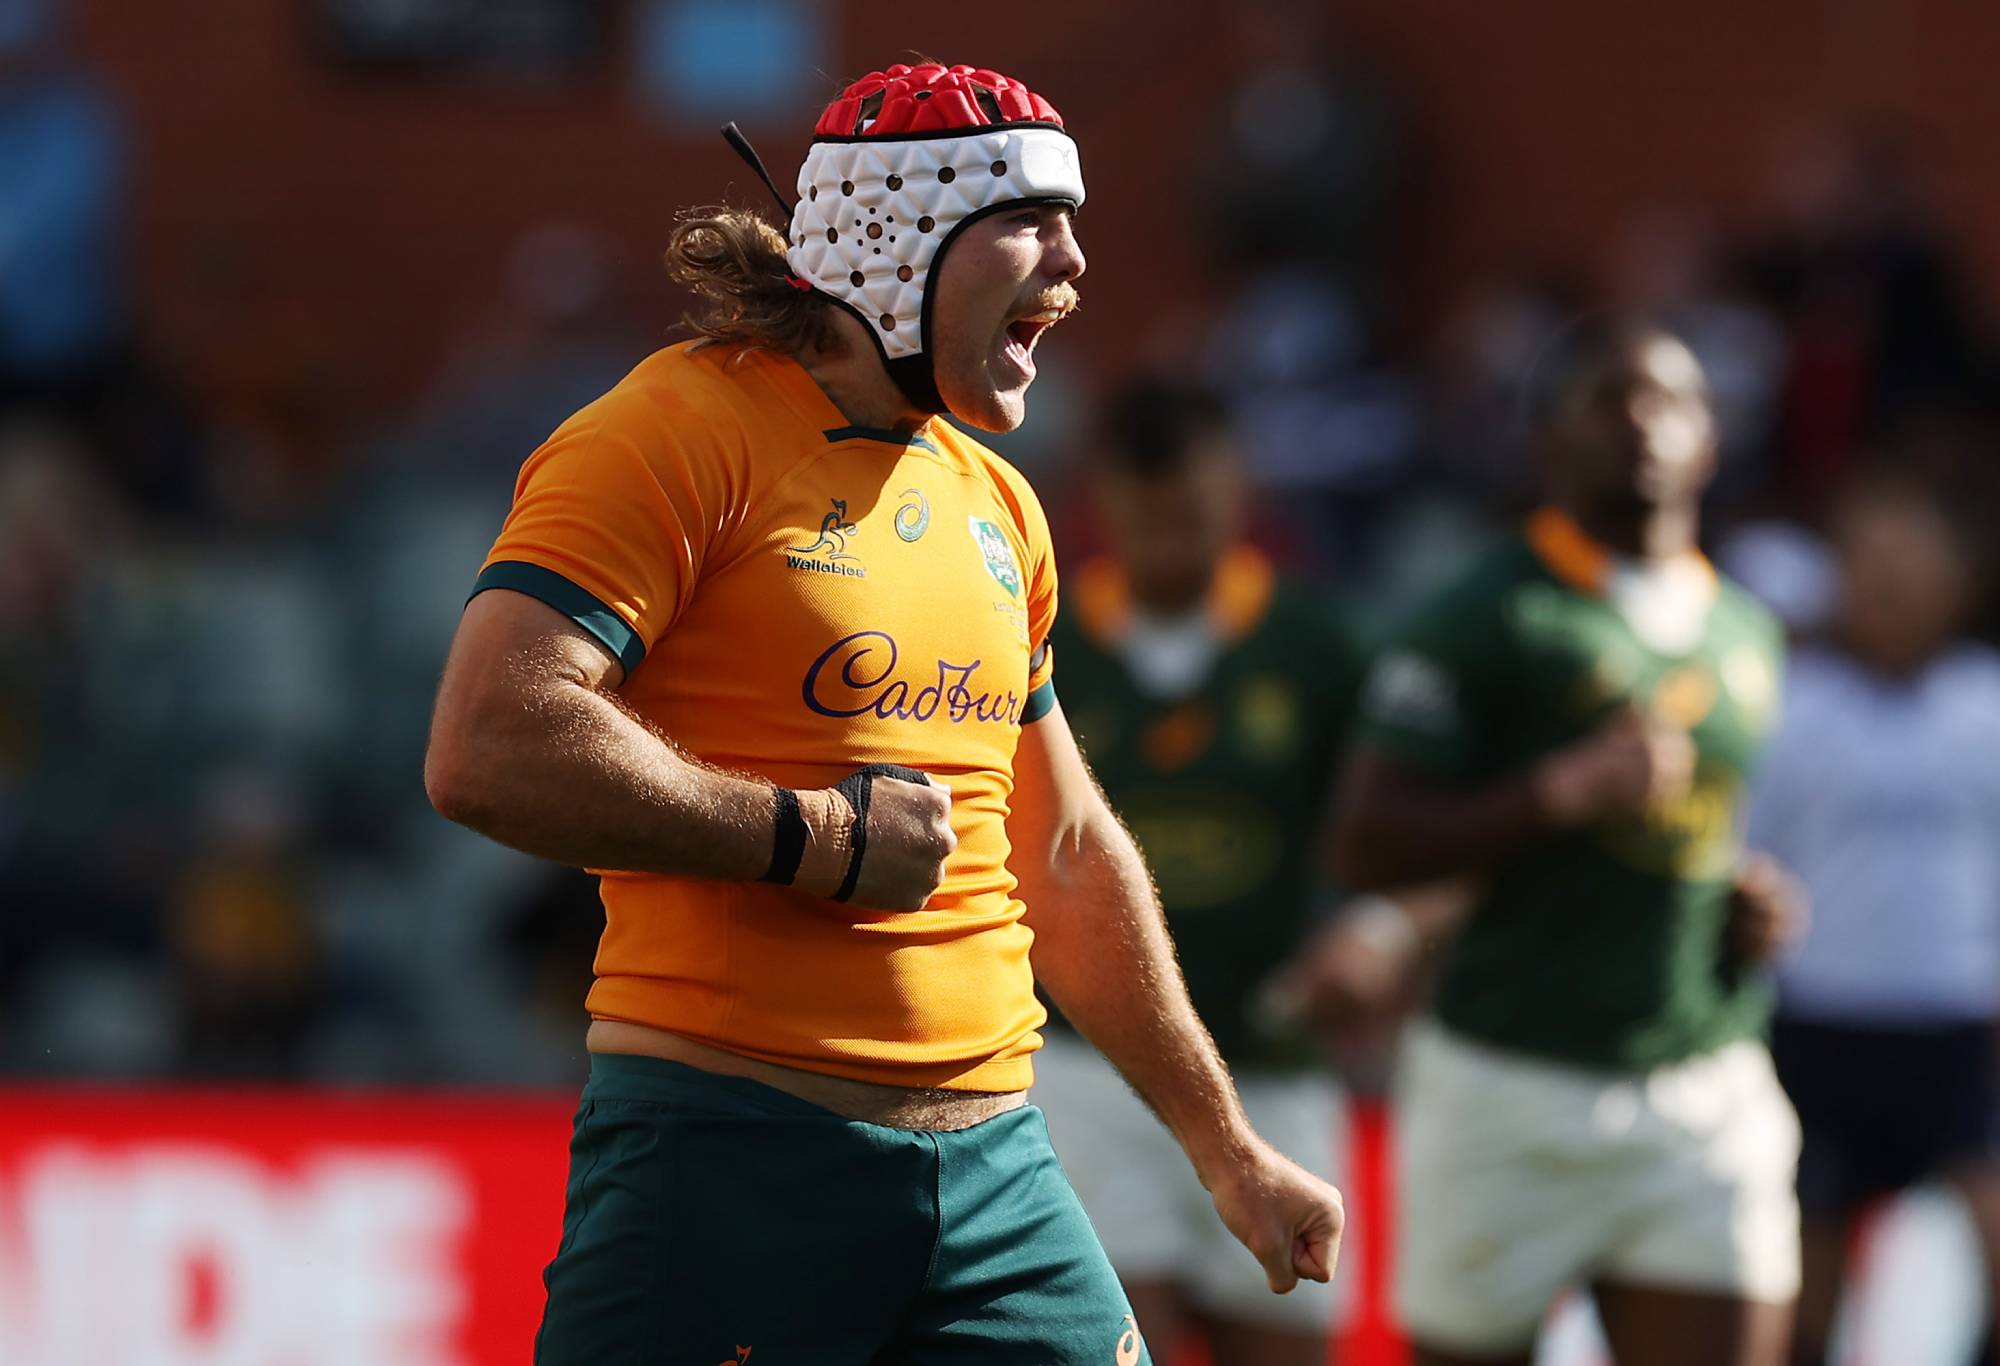 Fraser McReight of the Wallabies celebrates after scoring a try during The Rugby Championship match between the Australian Wallabies and the South African Springboks at Adelaide Oval on August 27, 2022 in Adelaide, Australia. (Photo by Mark Kolbe/Getty Images)